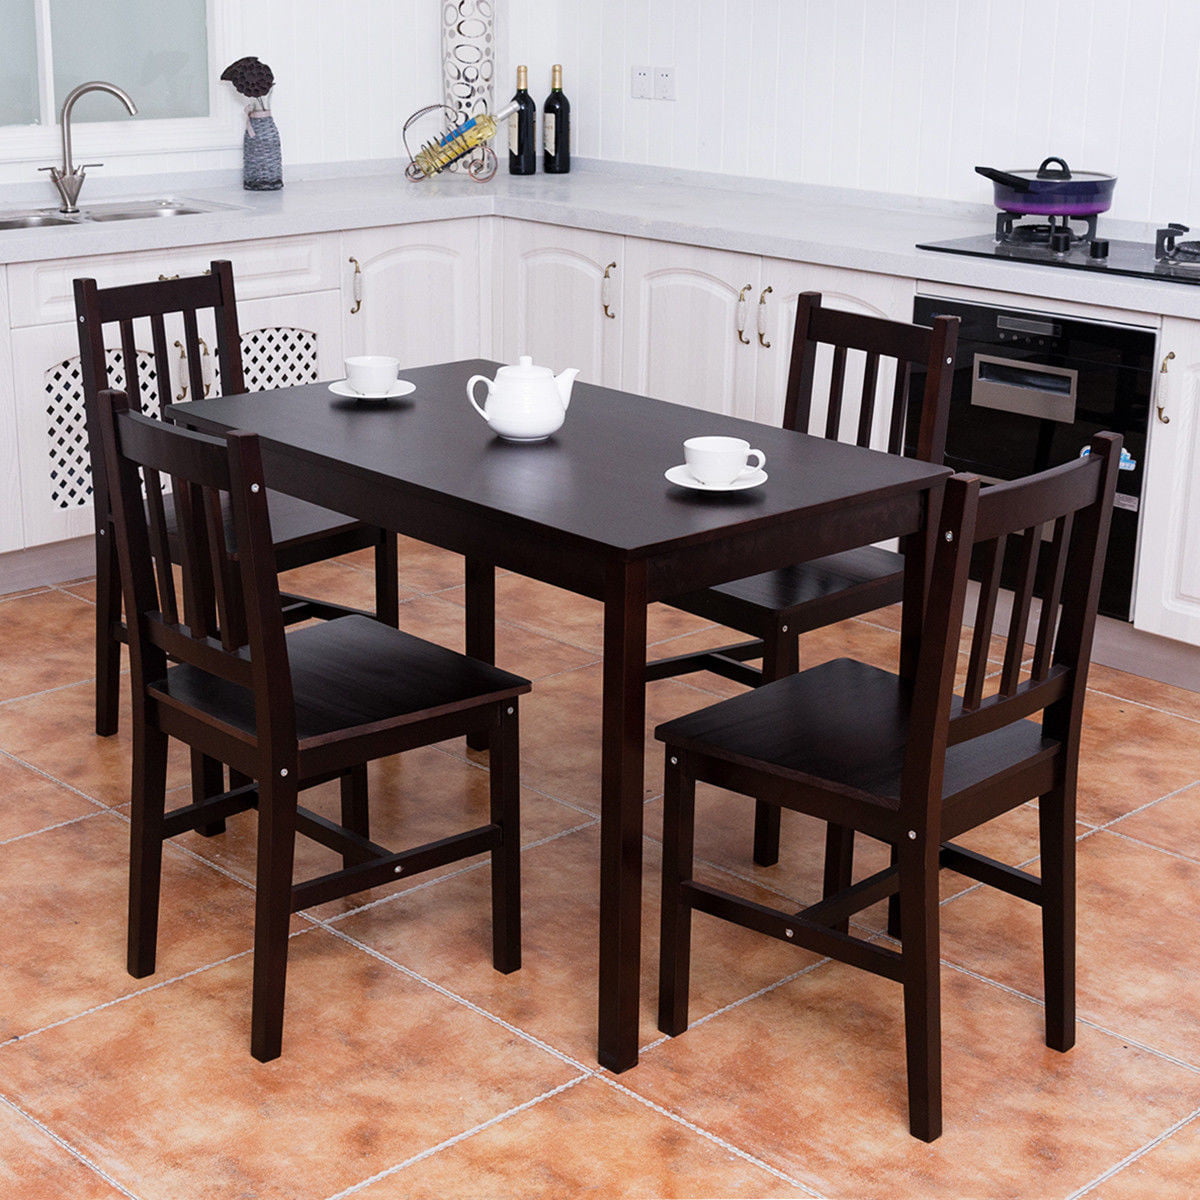  cheap small kitchen table and chairs